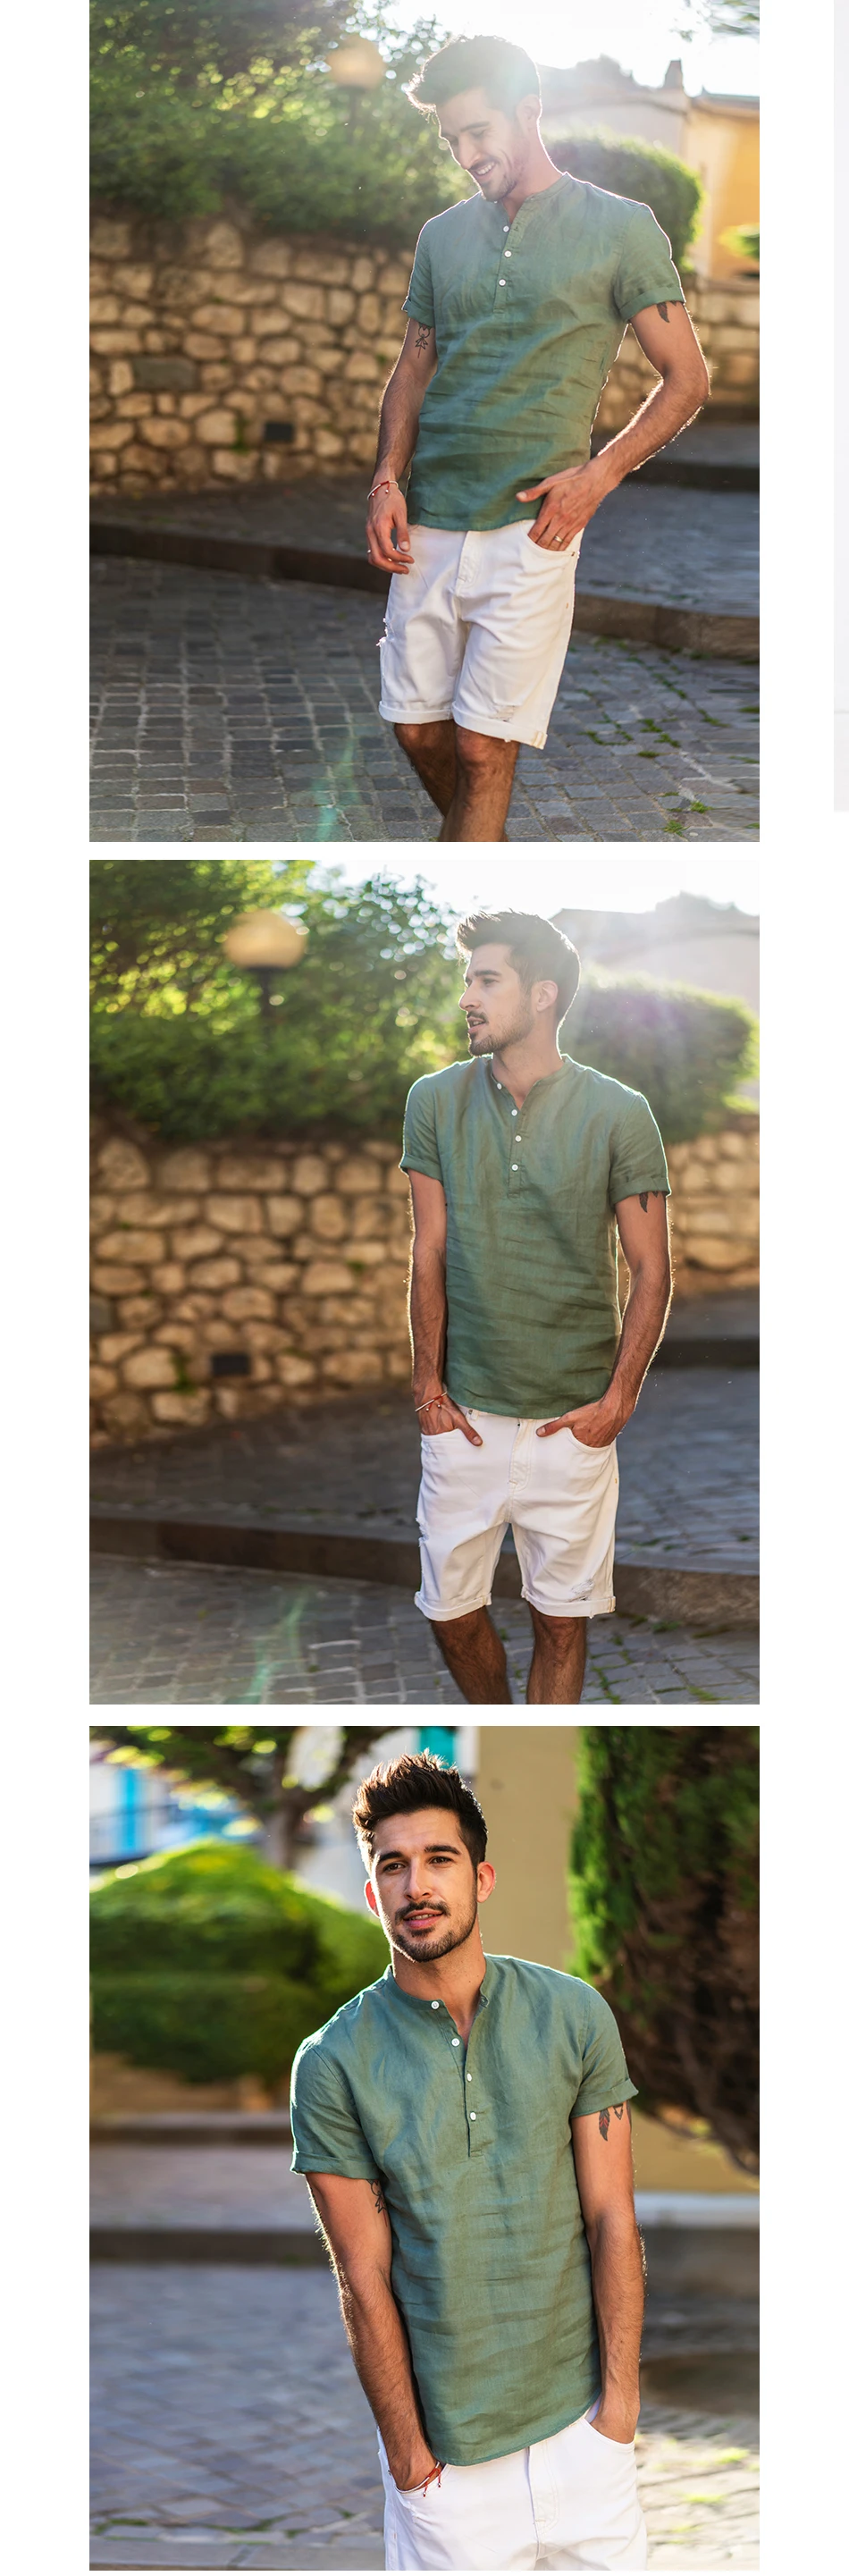 Simwood 2019 New Arrival Summer Short-sleeved Shirts Men 100% Linen White Solid Color Slim Fit Plus Size Collarless Tops CS1534 21